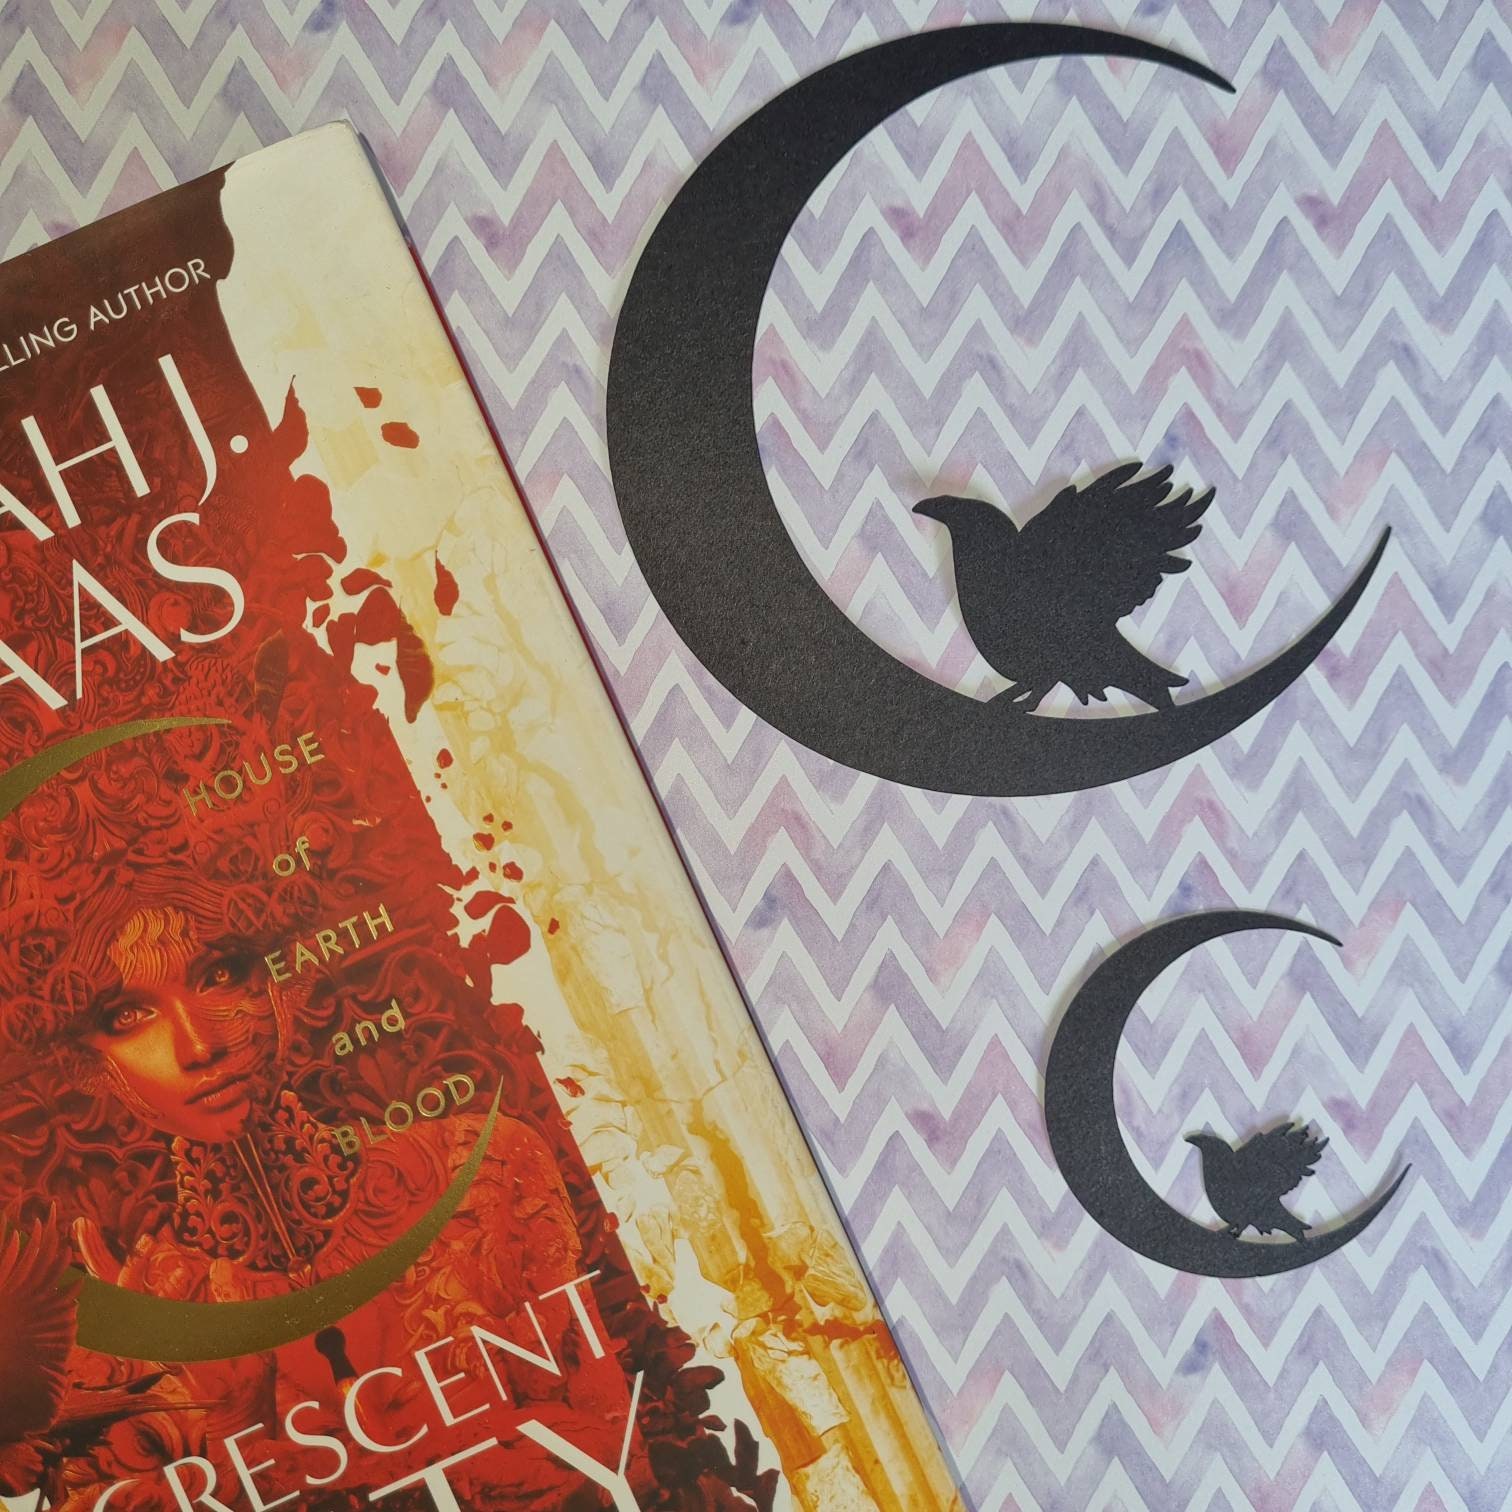 CRESCENT CITY Hand-painted Book Edges Sarah J Maas Earth and Blood Sprayed  Edges Edges Fantasy Books House of Flame 